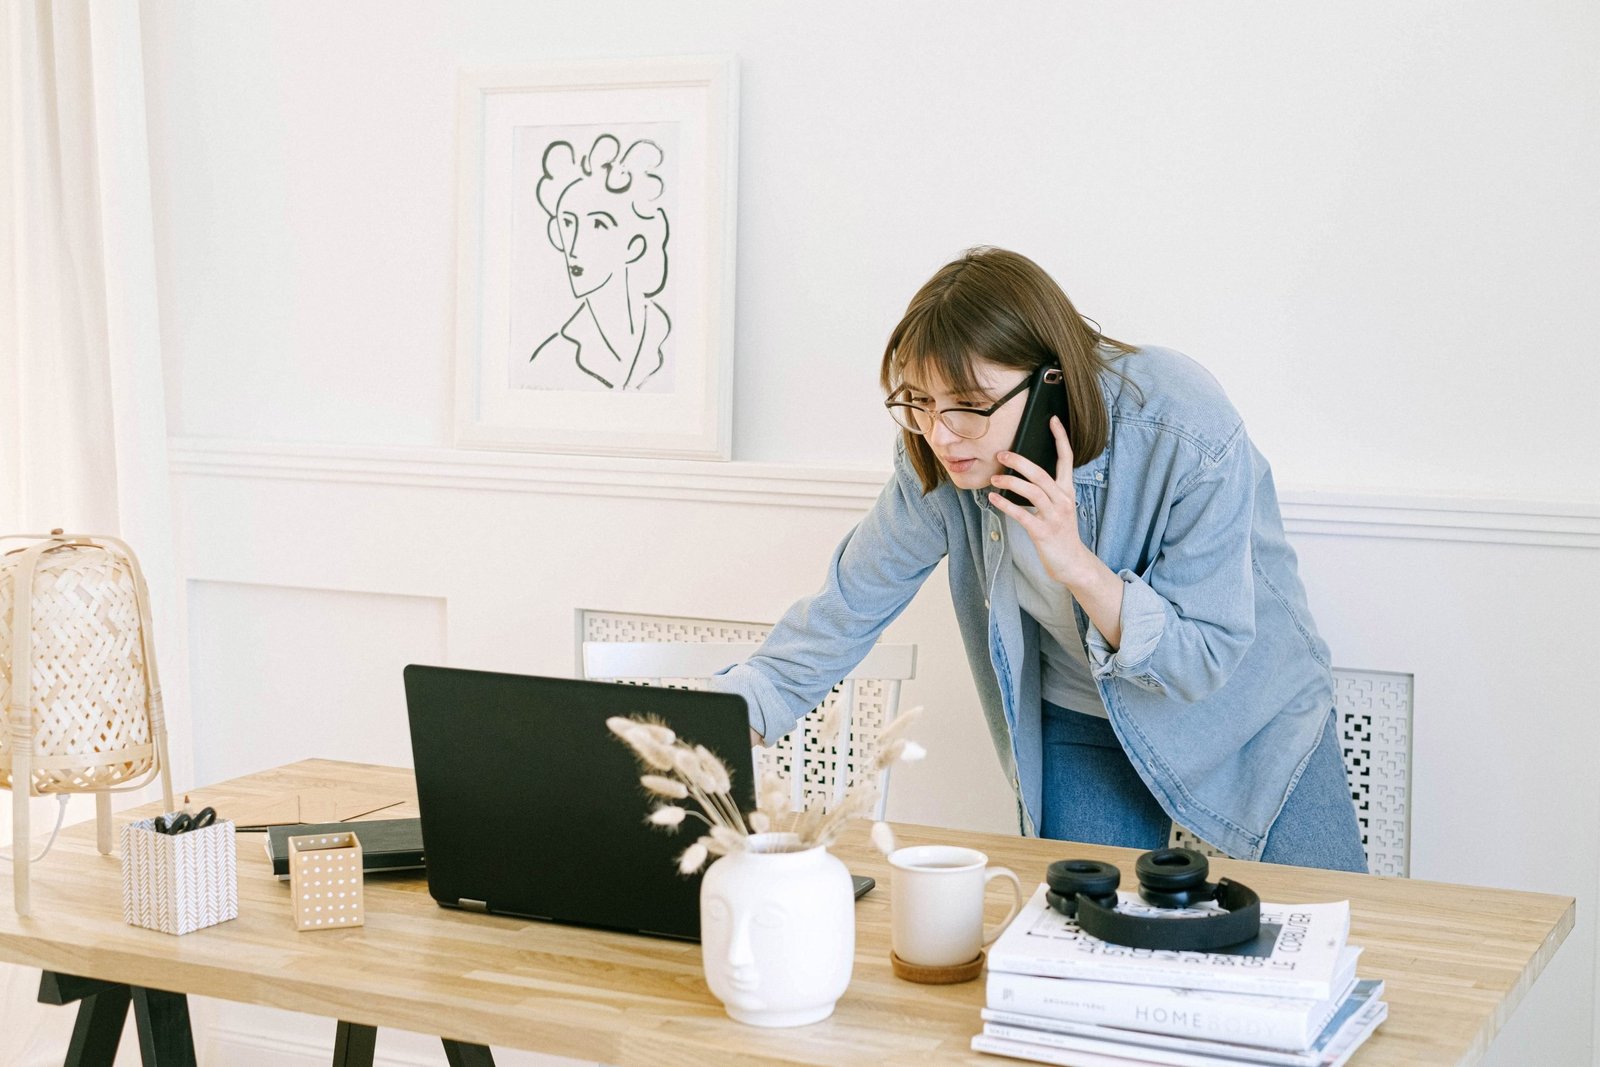 Busy woman speaking on the phone while looking at her laptop